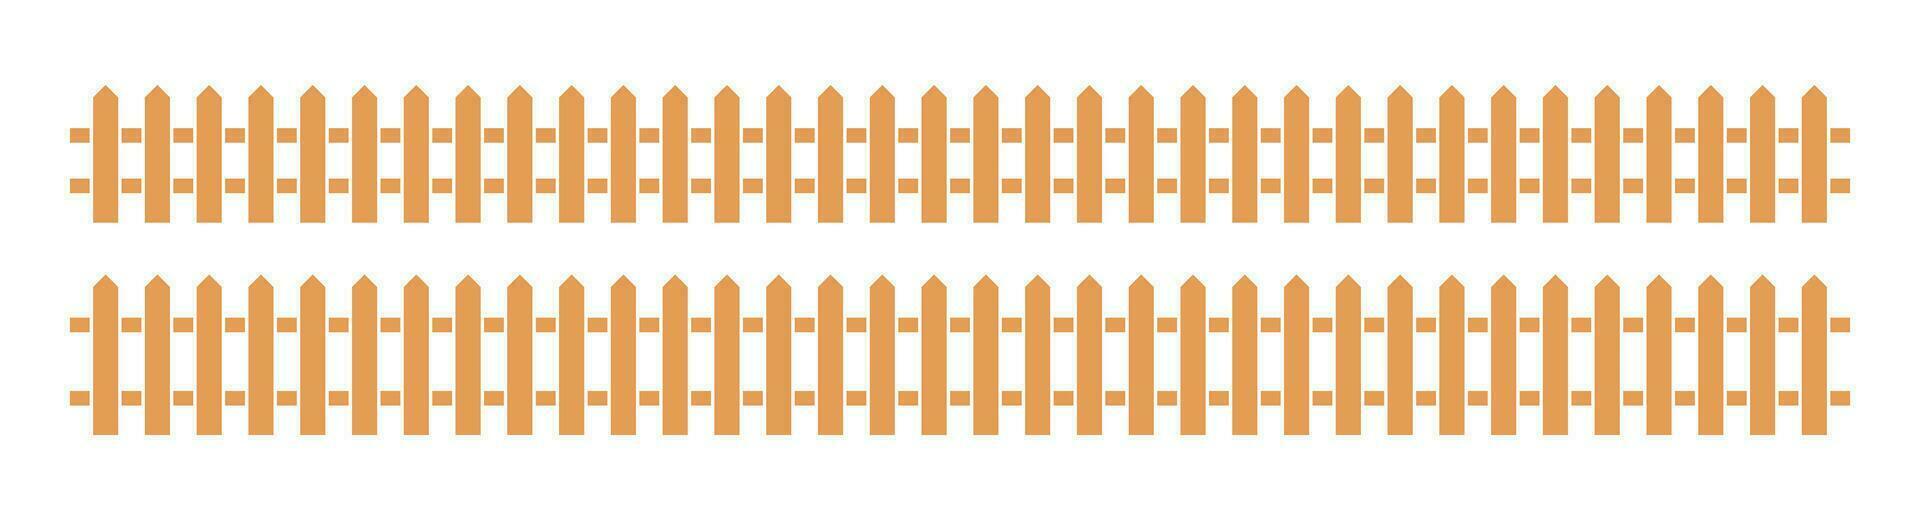 Colored fence in flat style vector illustration isolated on white